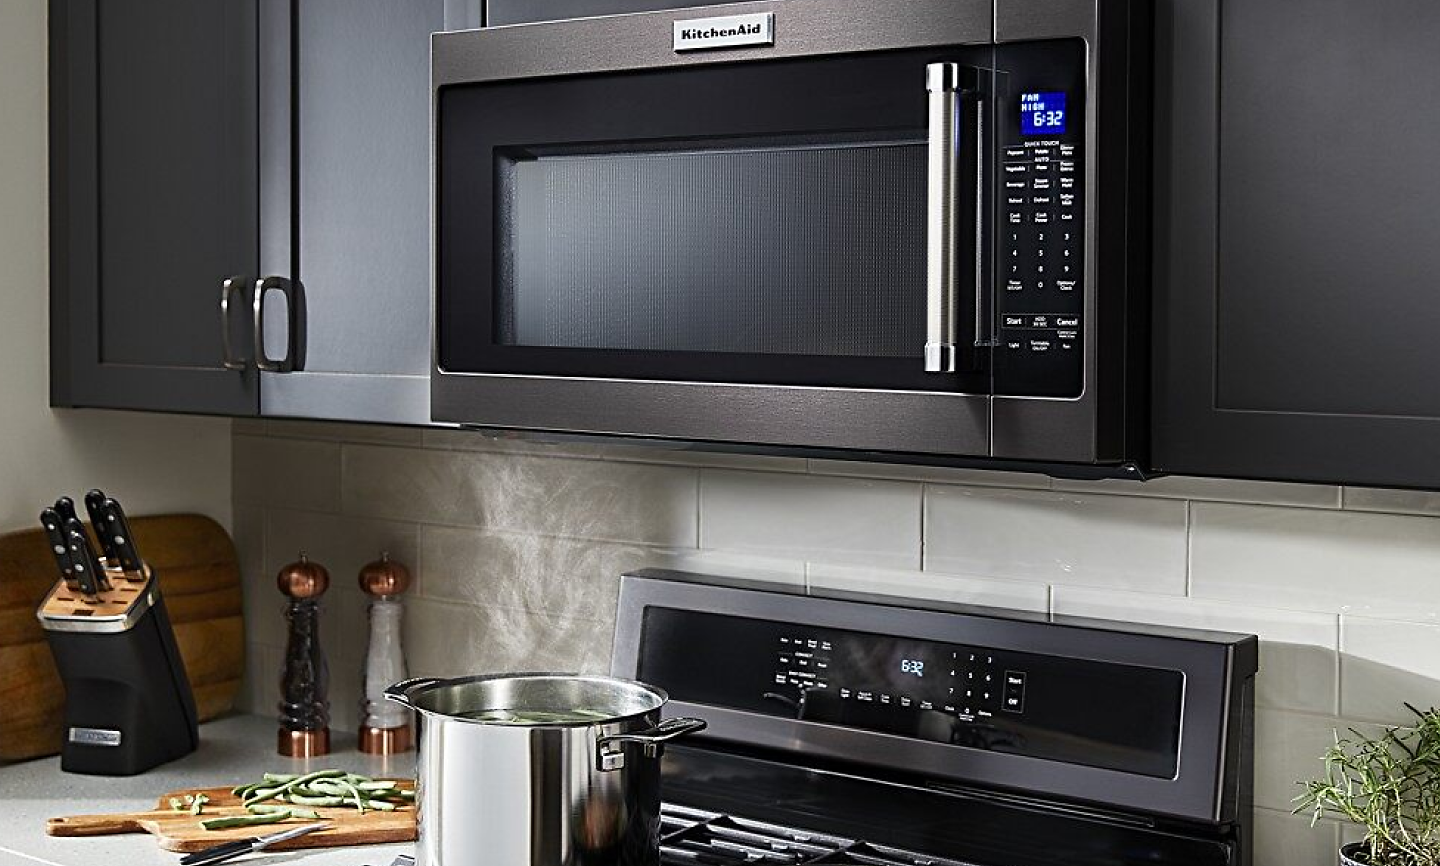 KitchenAid® microwave-hood combination installed above a gas range